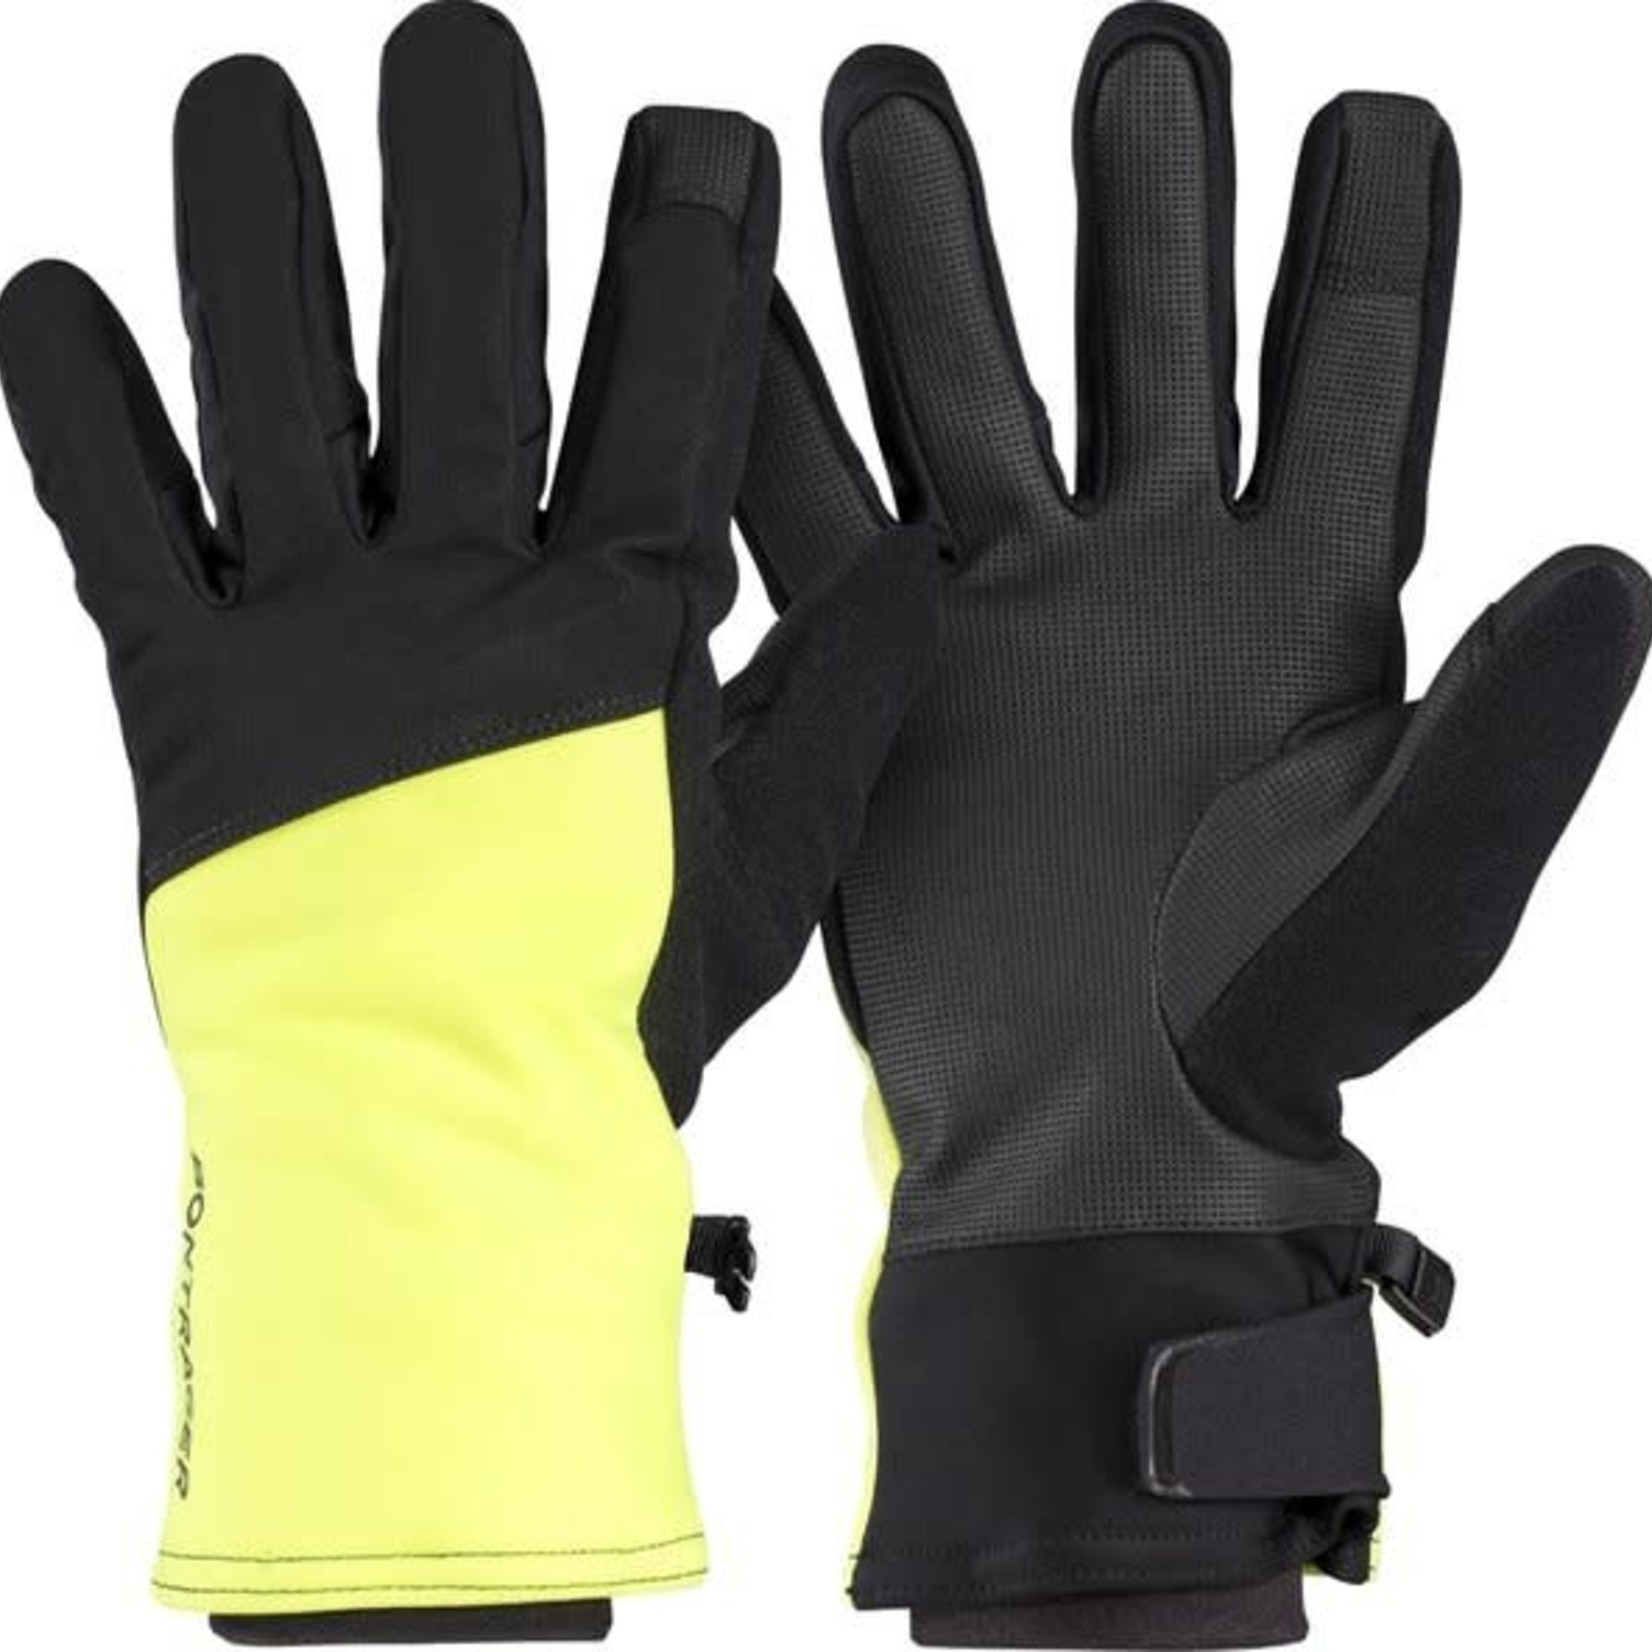 BONTRAGER Bontrager Velocis Softshell Winter Cycling Glove